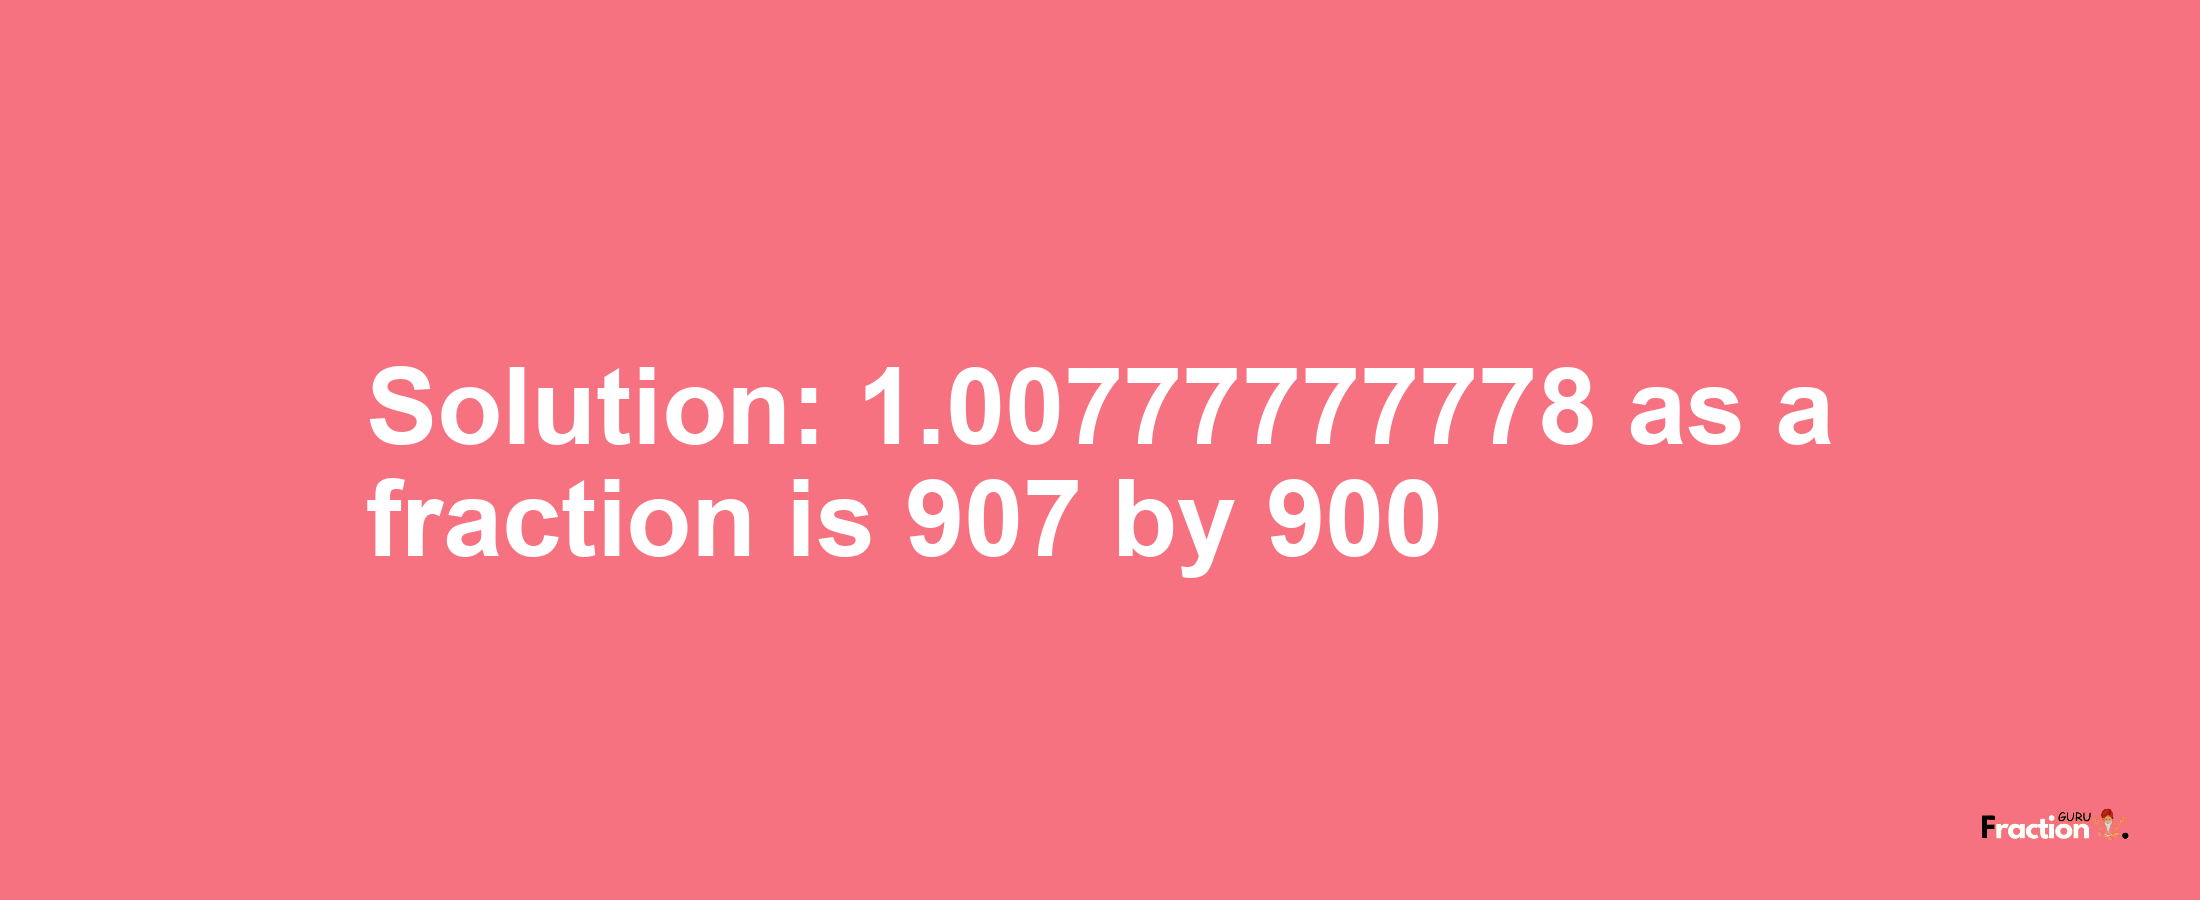 Solution:1.00777777778 as a fraction is 907/900